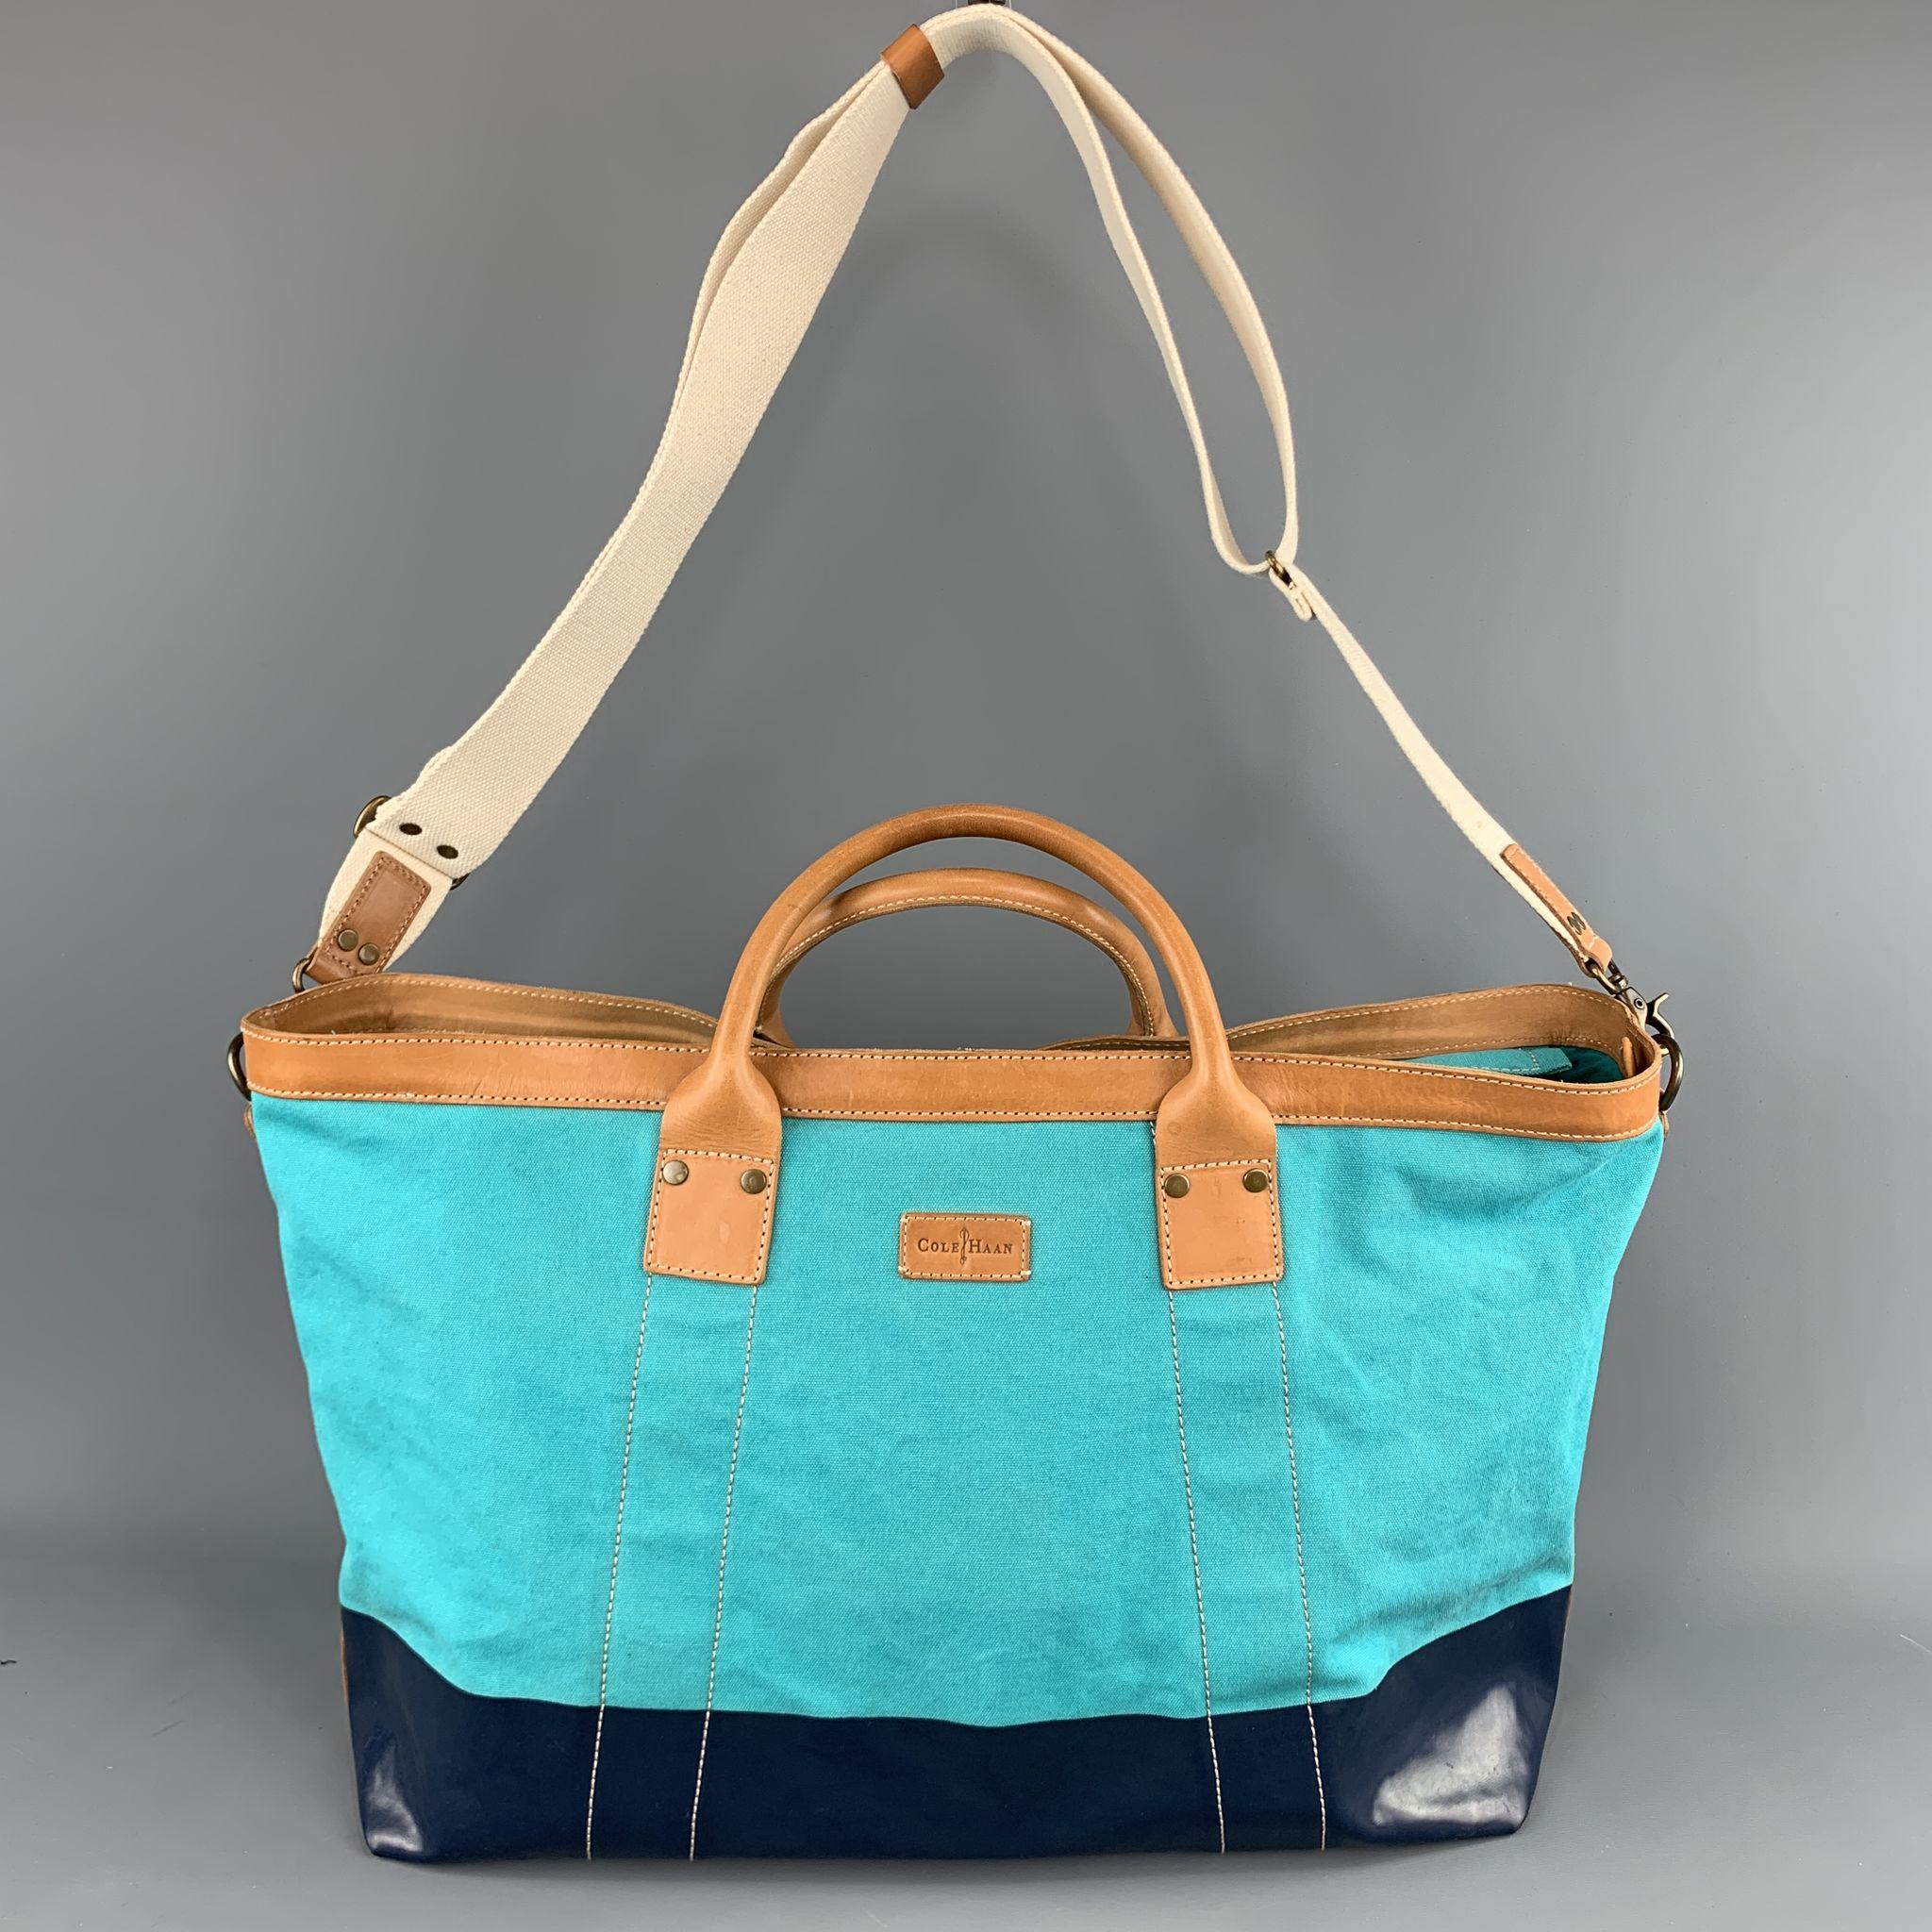 COLE HAAN Aqua & Navy Canvas Leather Two Tone Tote Bag 1